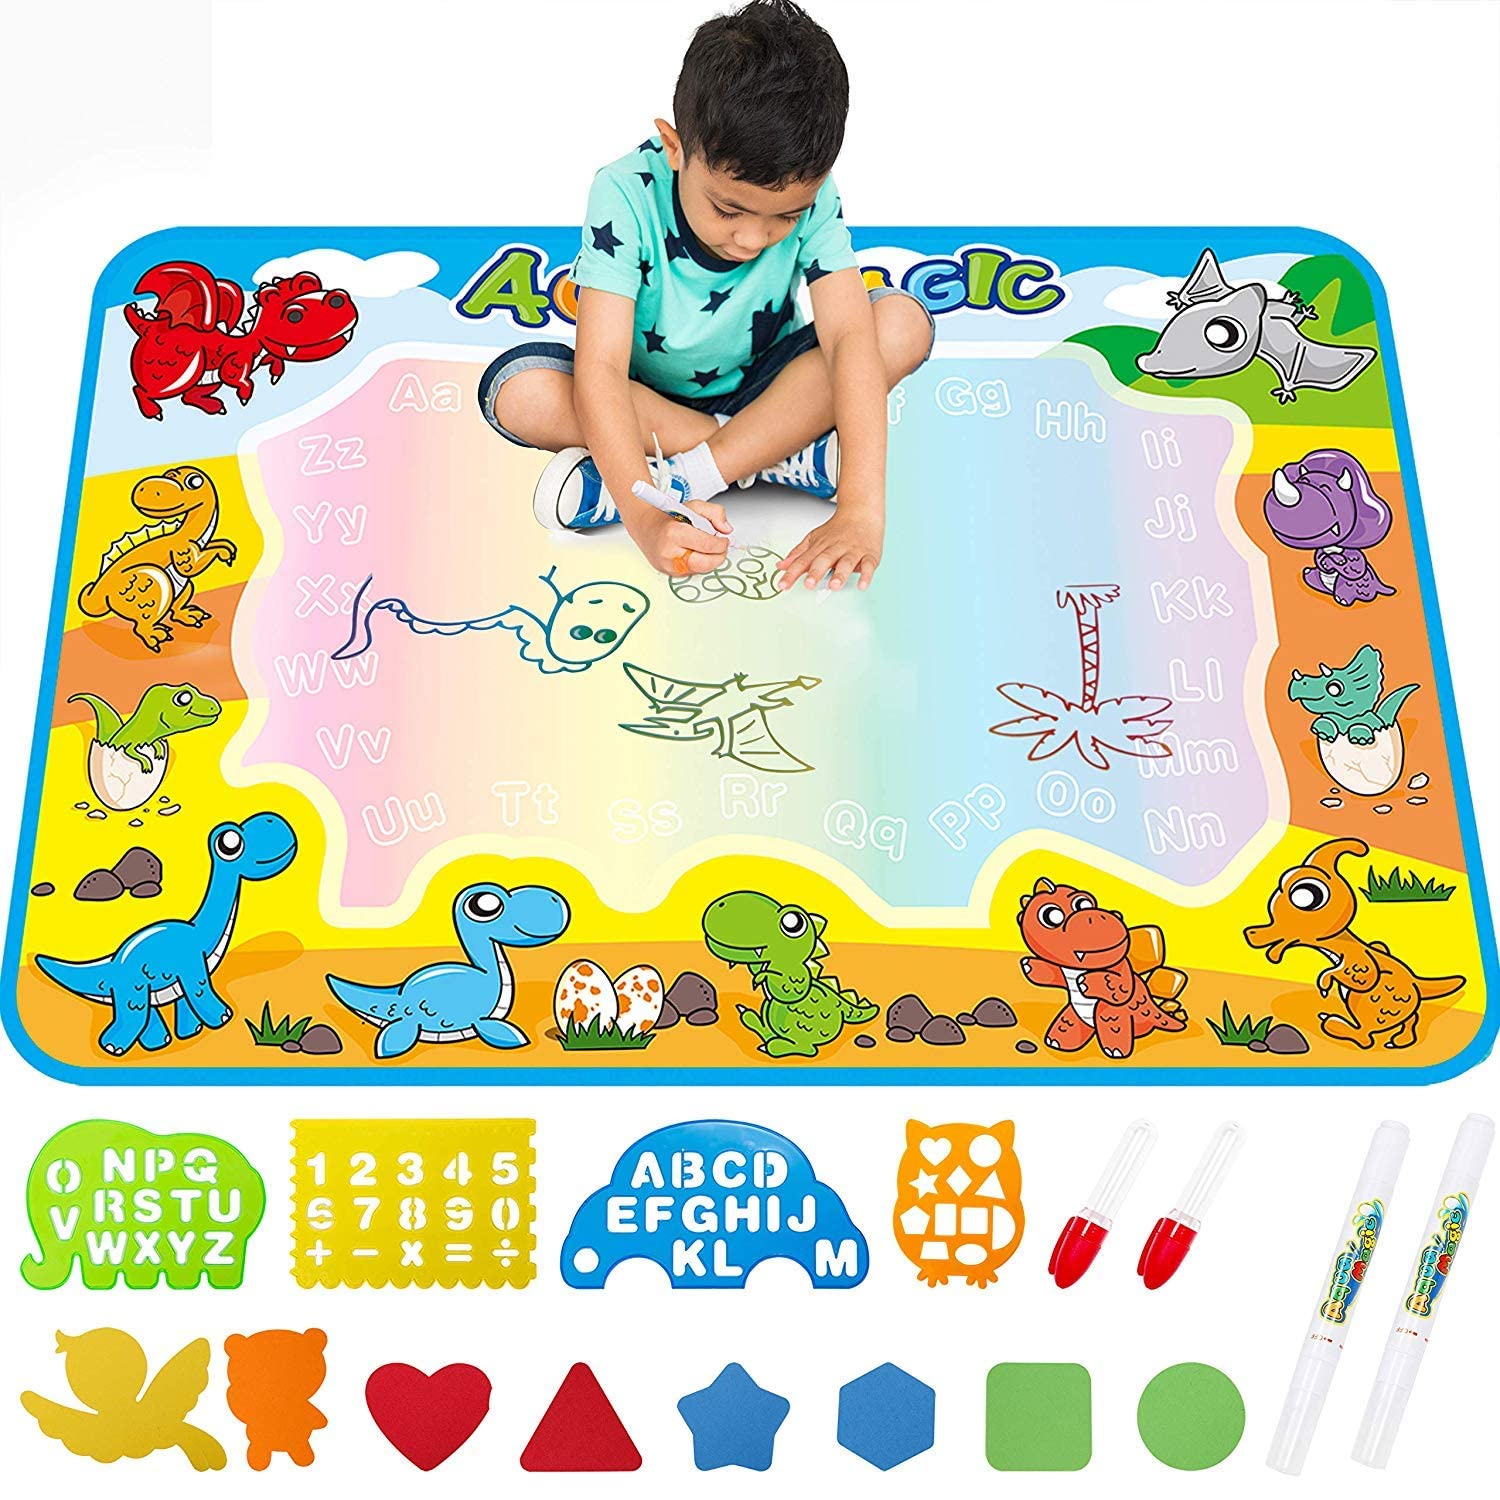 Free To Fly Kids Toys Water Doodle Mat: Dinosaur Painting coloring Pad for Toddlers 1-3 - Aqua Magic Drawing Board for 2 3 4 Year Old Toddle